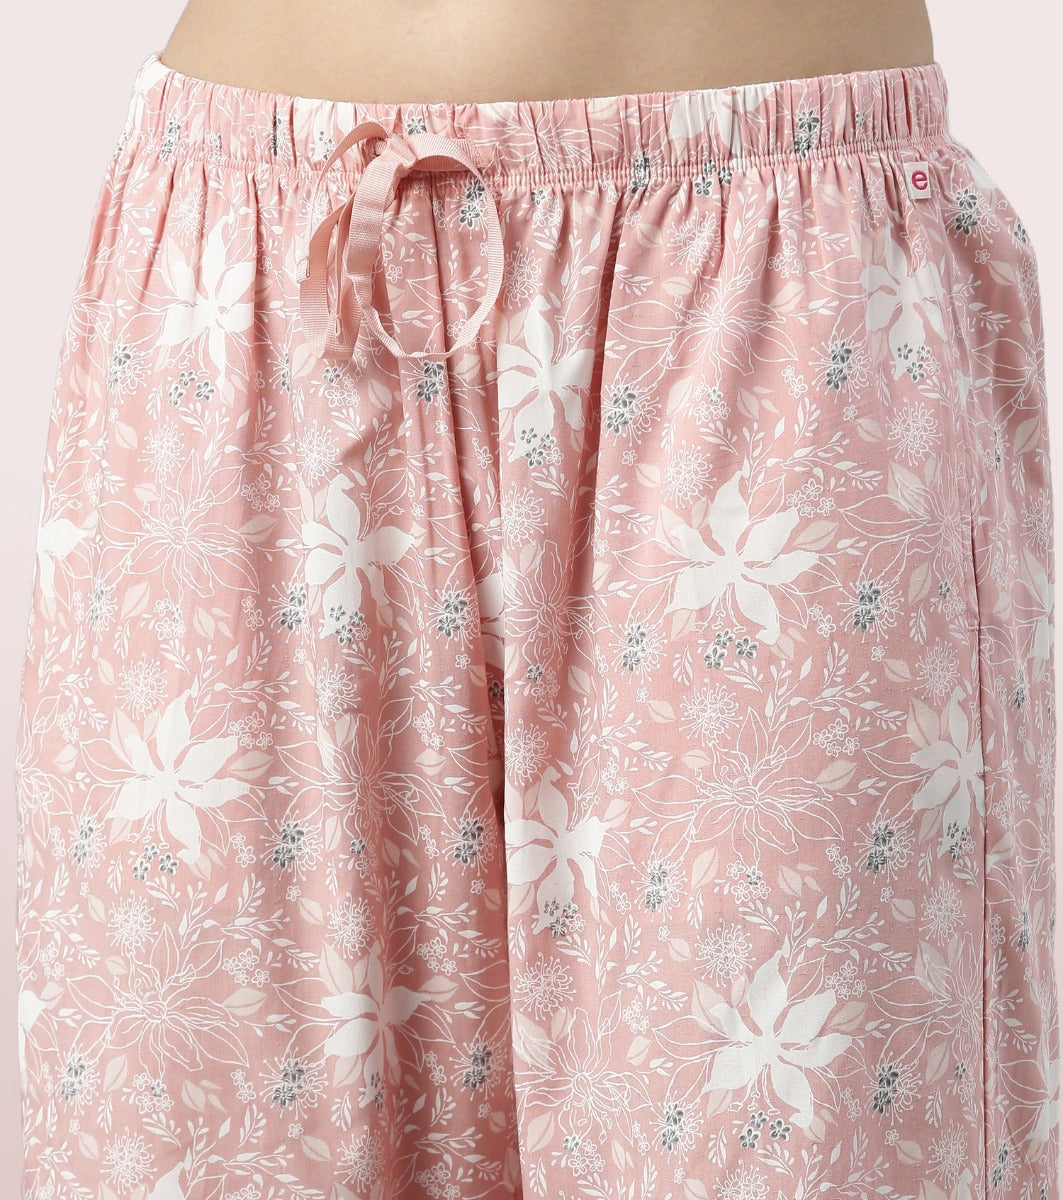 Slounge Pant | Modal Woven Printed Pull-On Pant